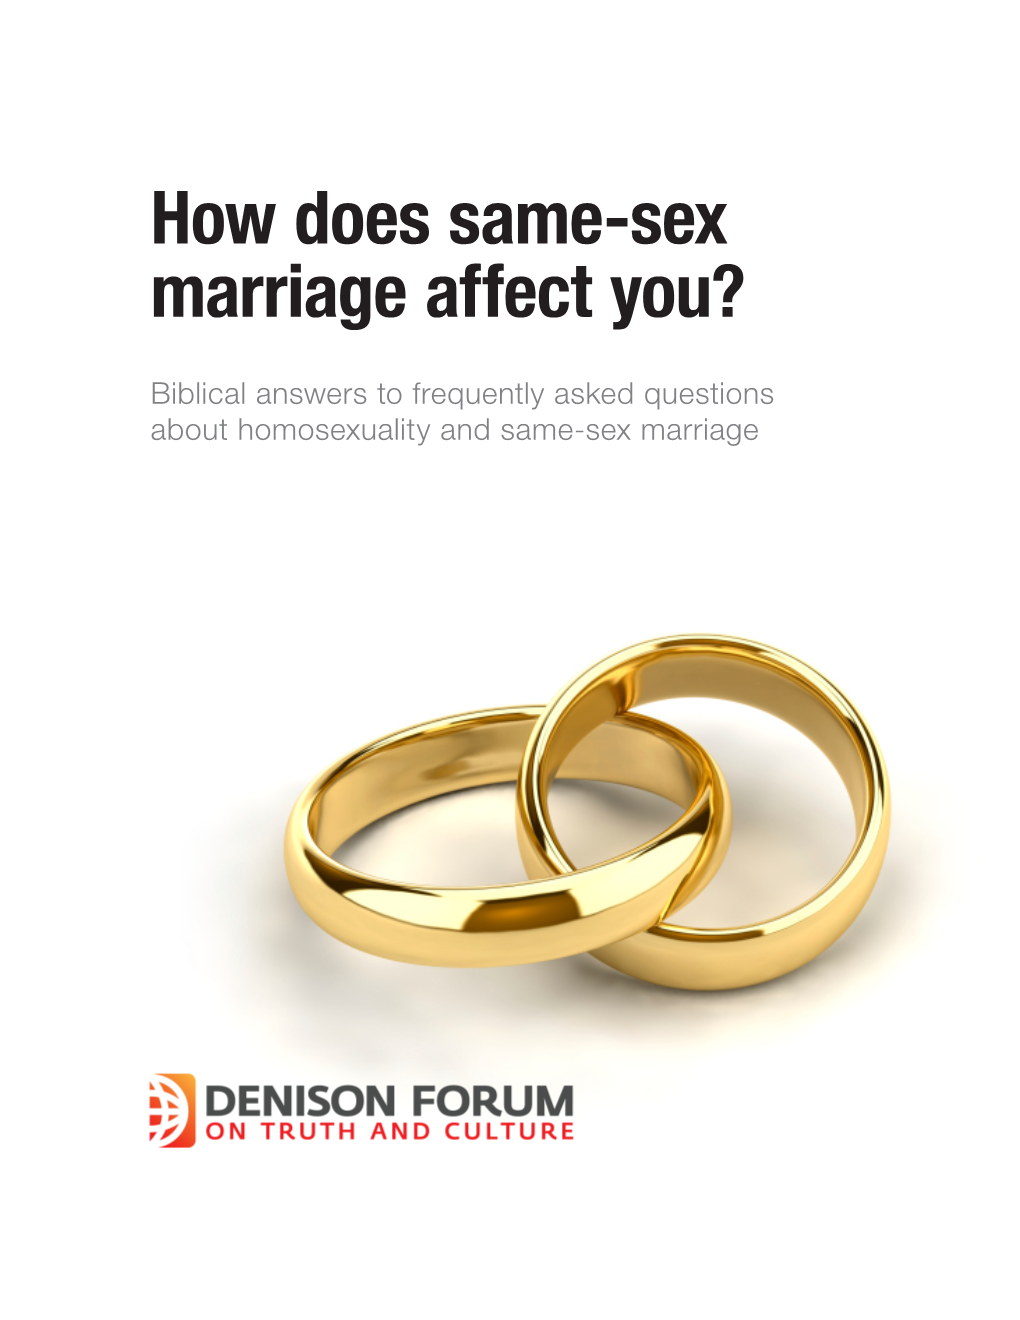 How Does Same-Sex Marriage Affect You?